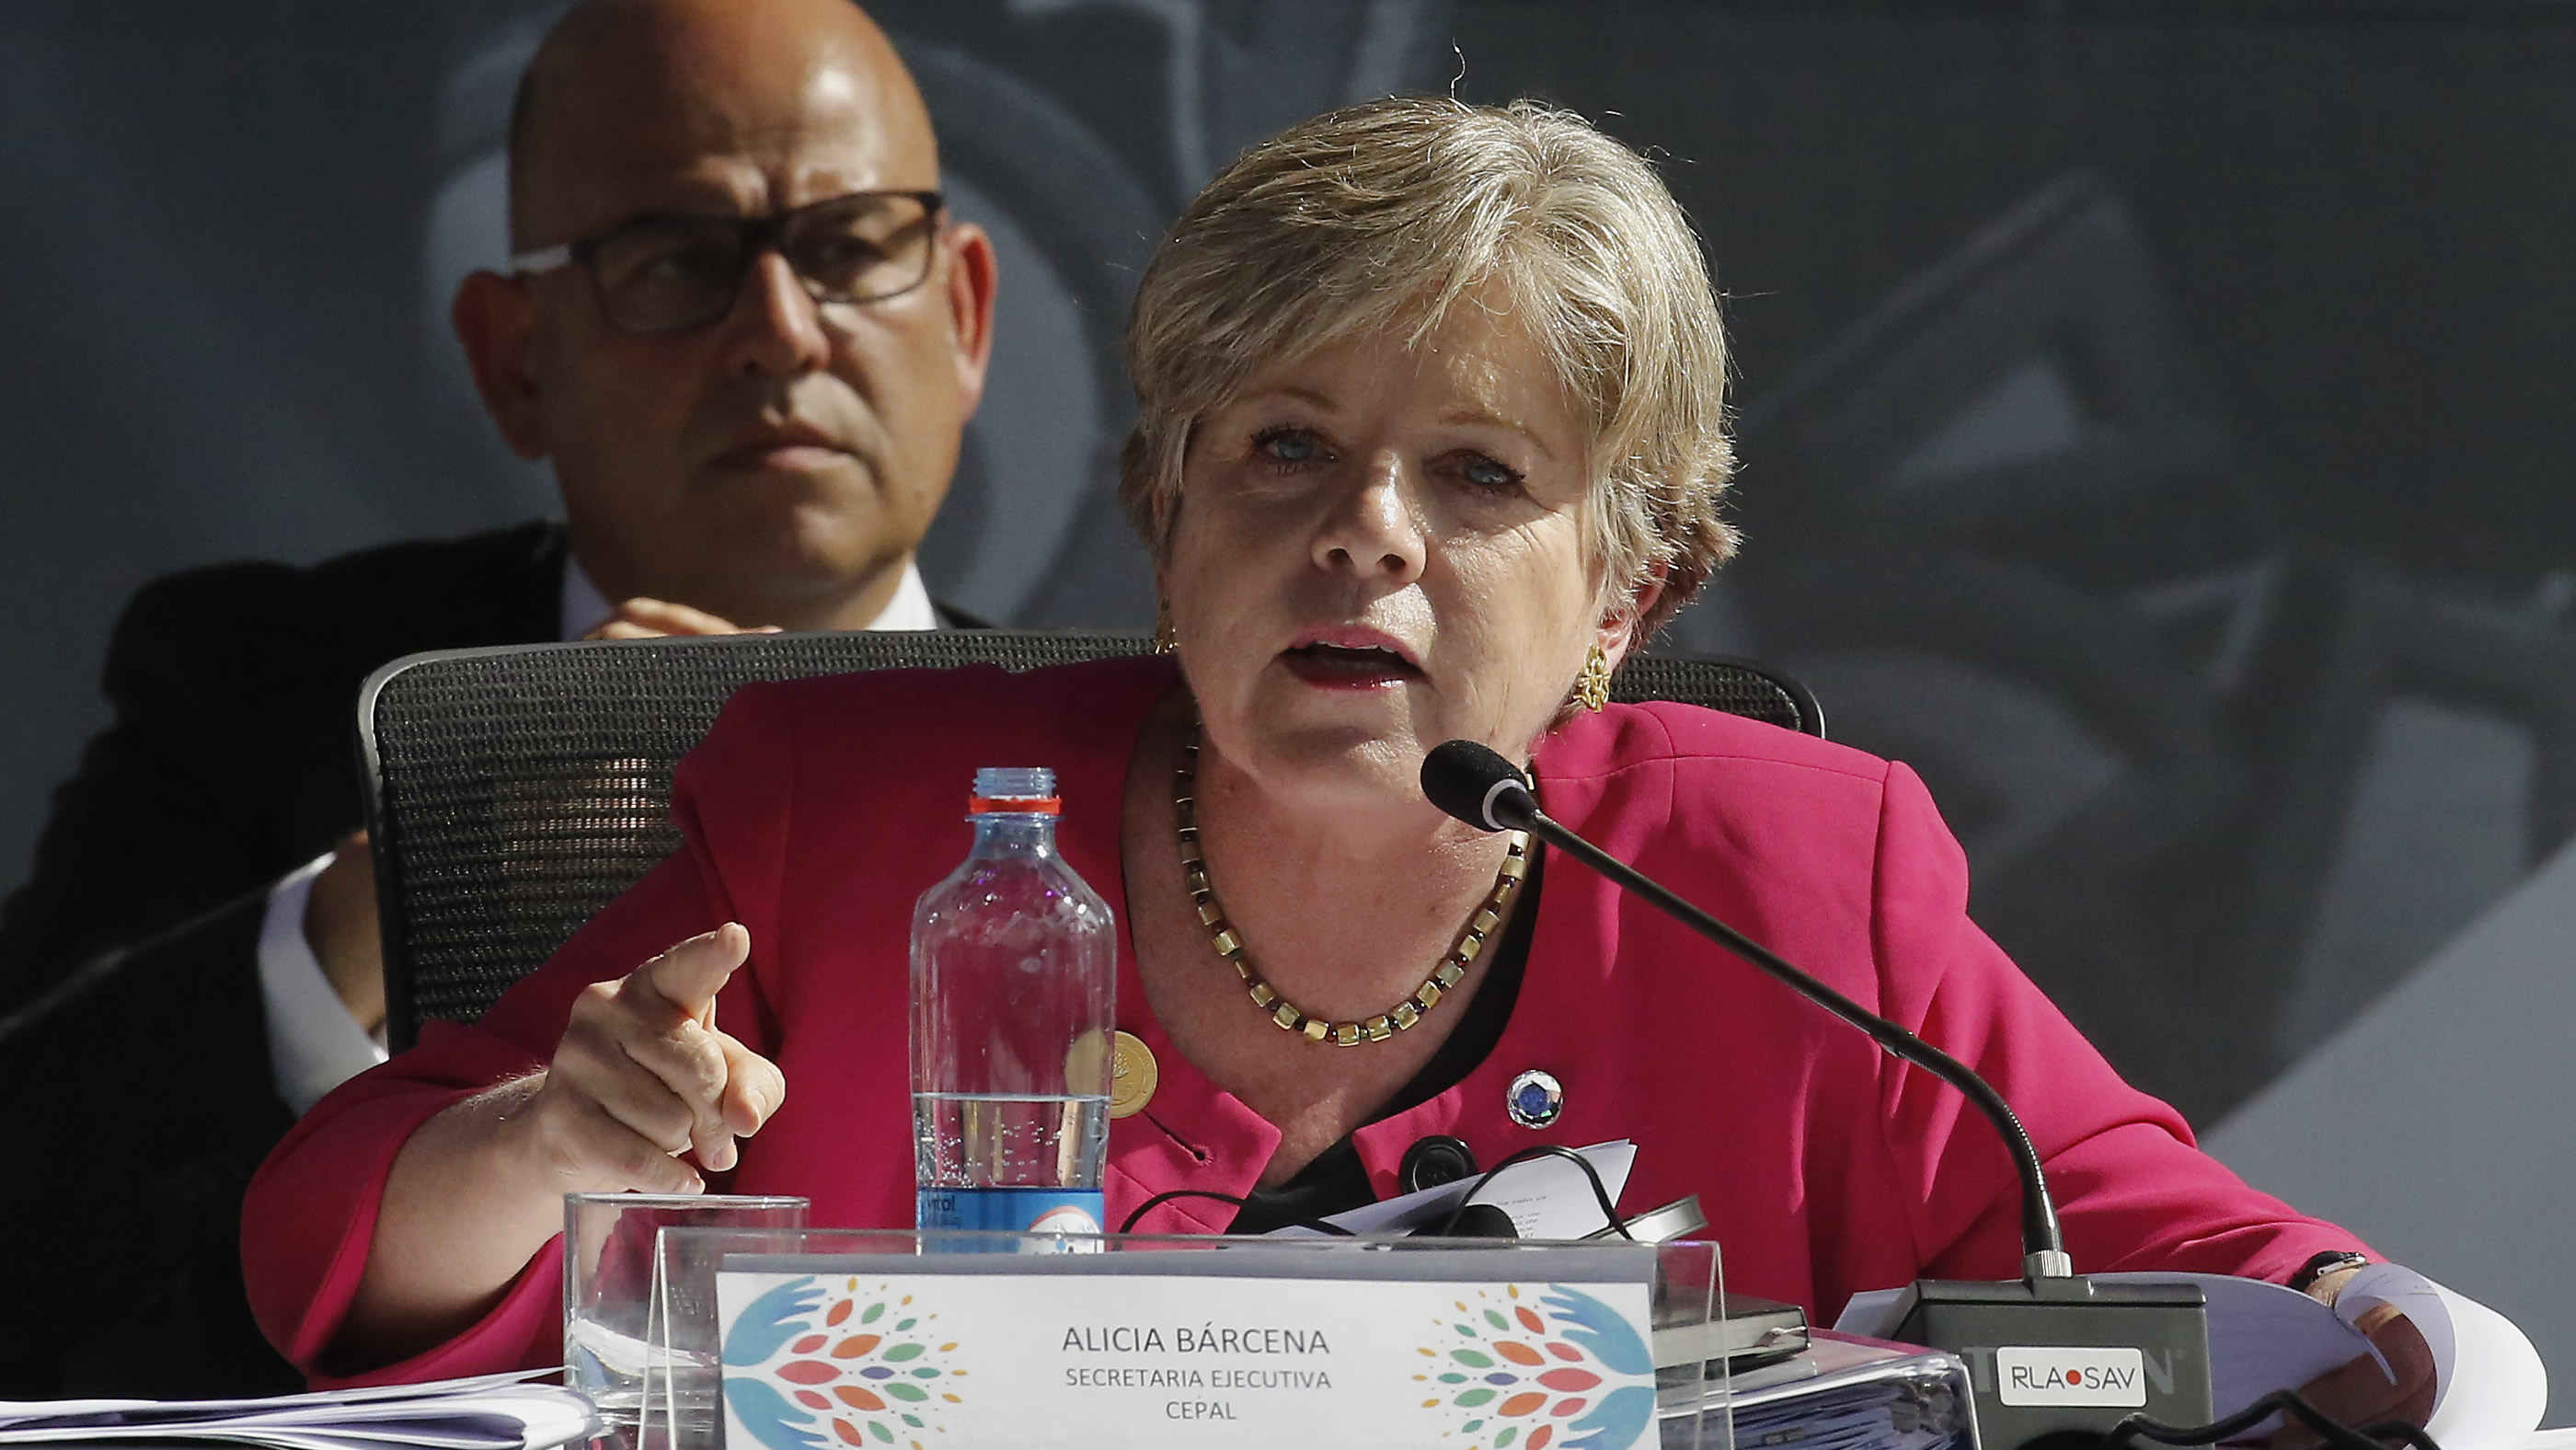 ECLAC's Executive Secretary, Alicia Bárcena, took part in the high-level event organized by the Chilean Government in collaboration with UN Women.